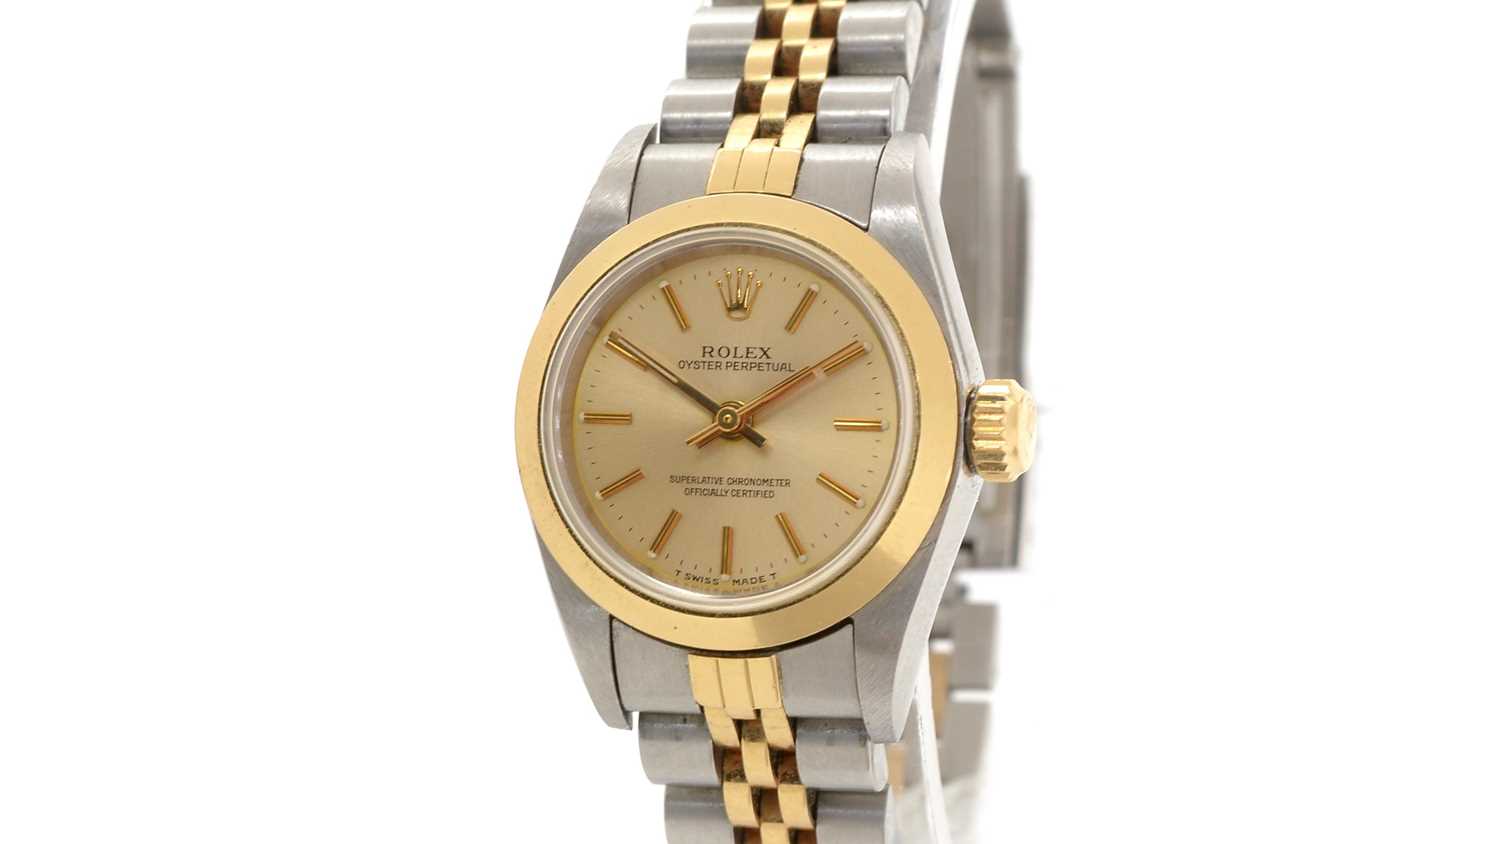 Lot 434 - Rolex Oyster Perpetual: a gold and steel-cased lady's automatic wristwatch